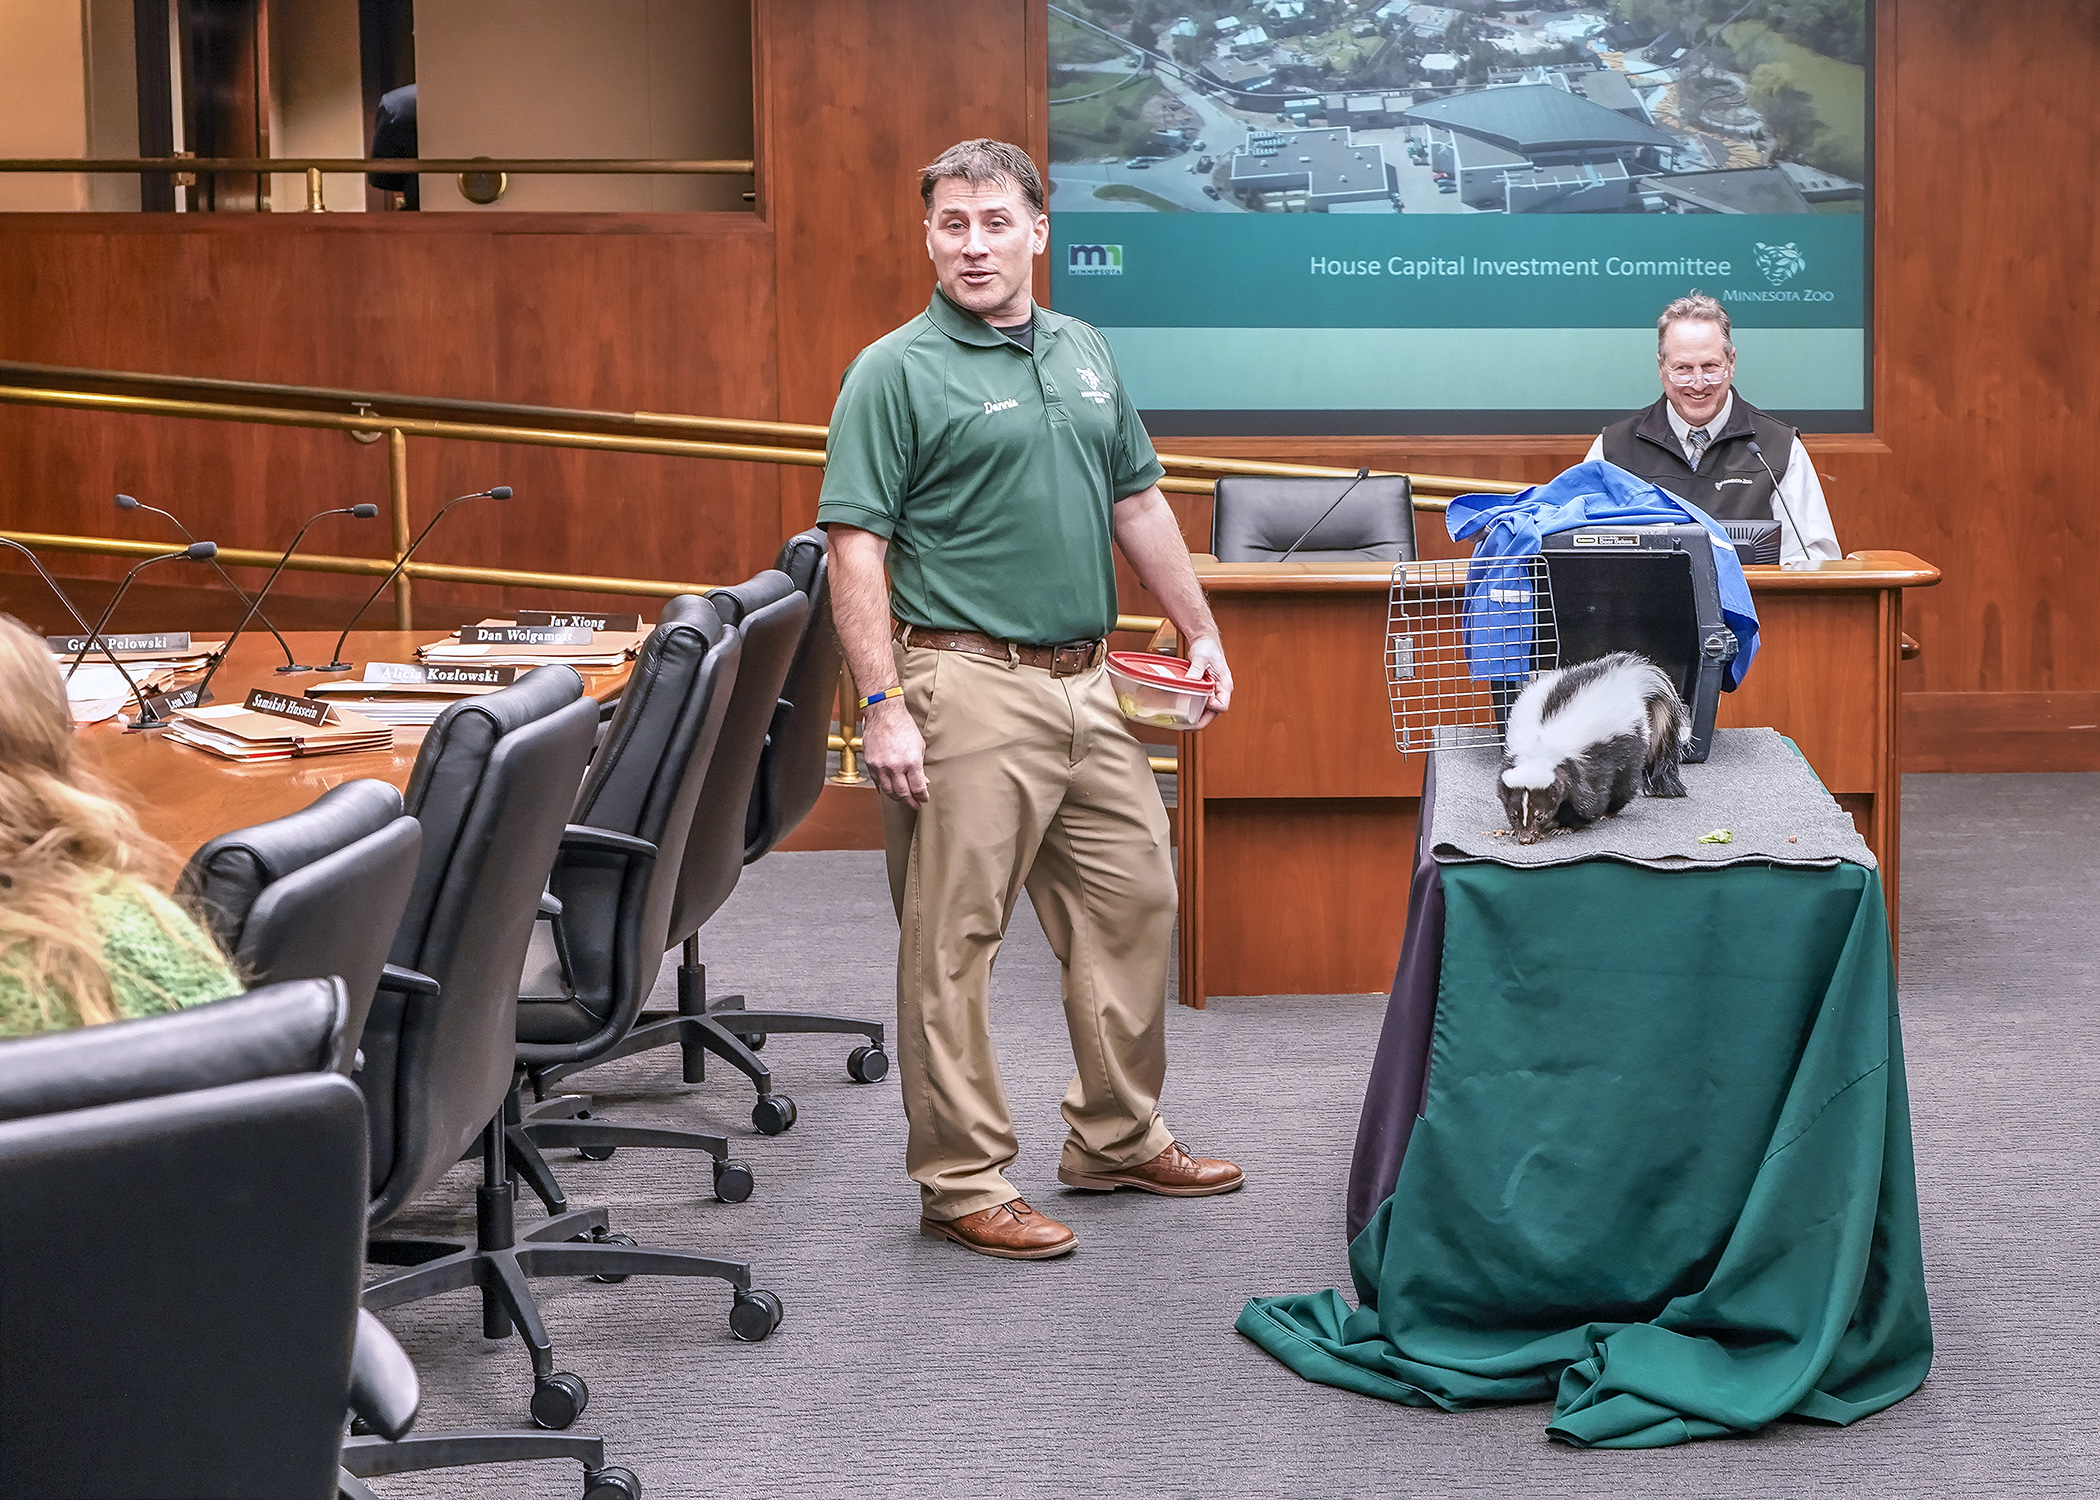 Donnie Crook, a Minnesota Zoo naturalist, and Director John Frawley introduce Leia, a 9-year-old striped skunk, to the House Capital Investment Committee March 18. (Photo by Andrew VonBank)